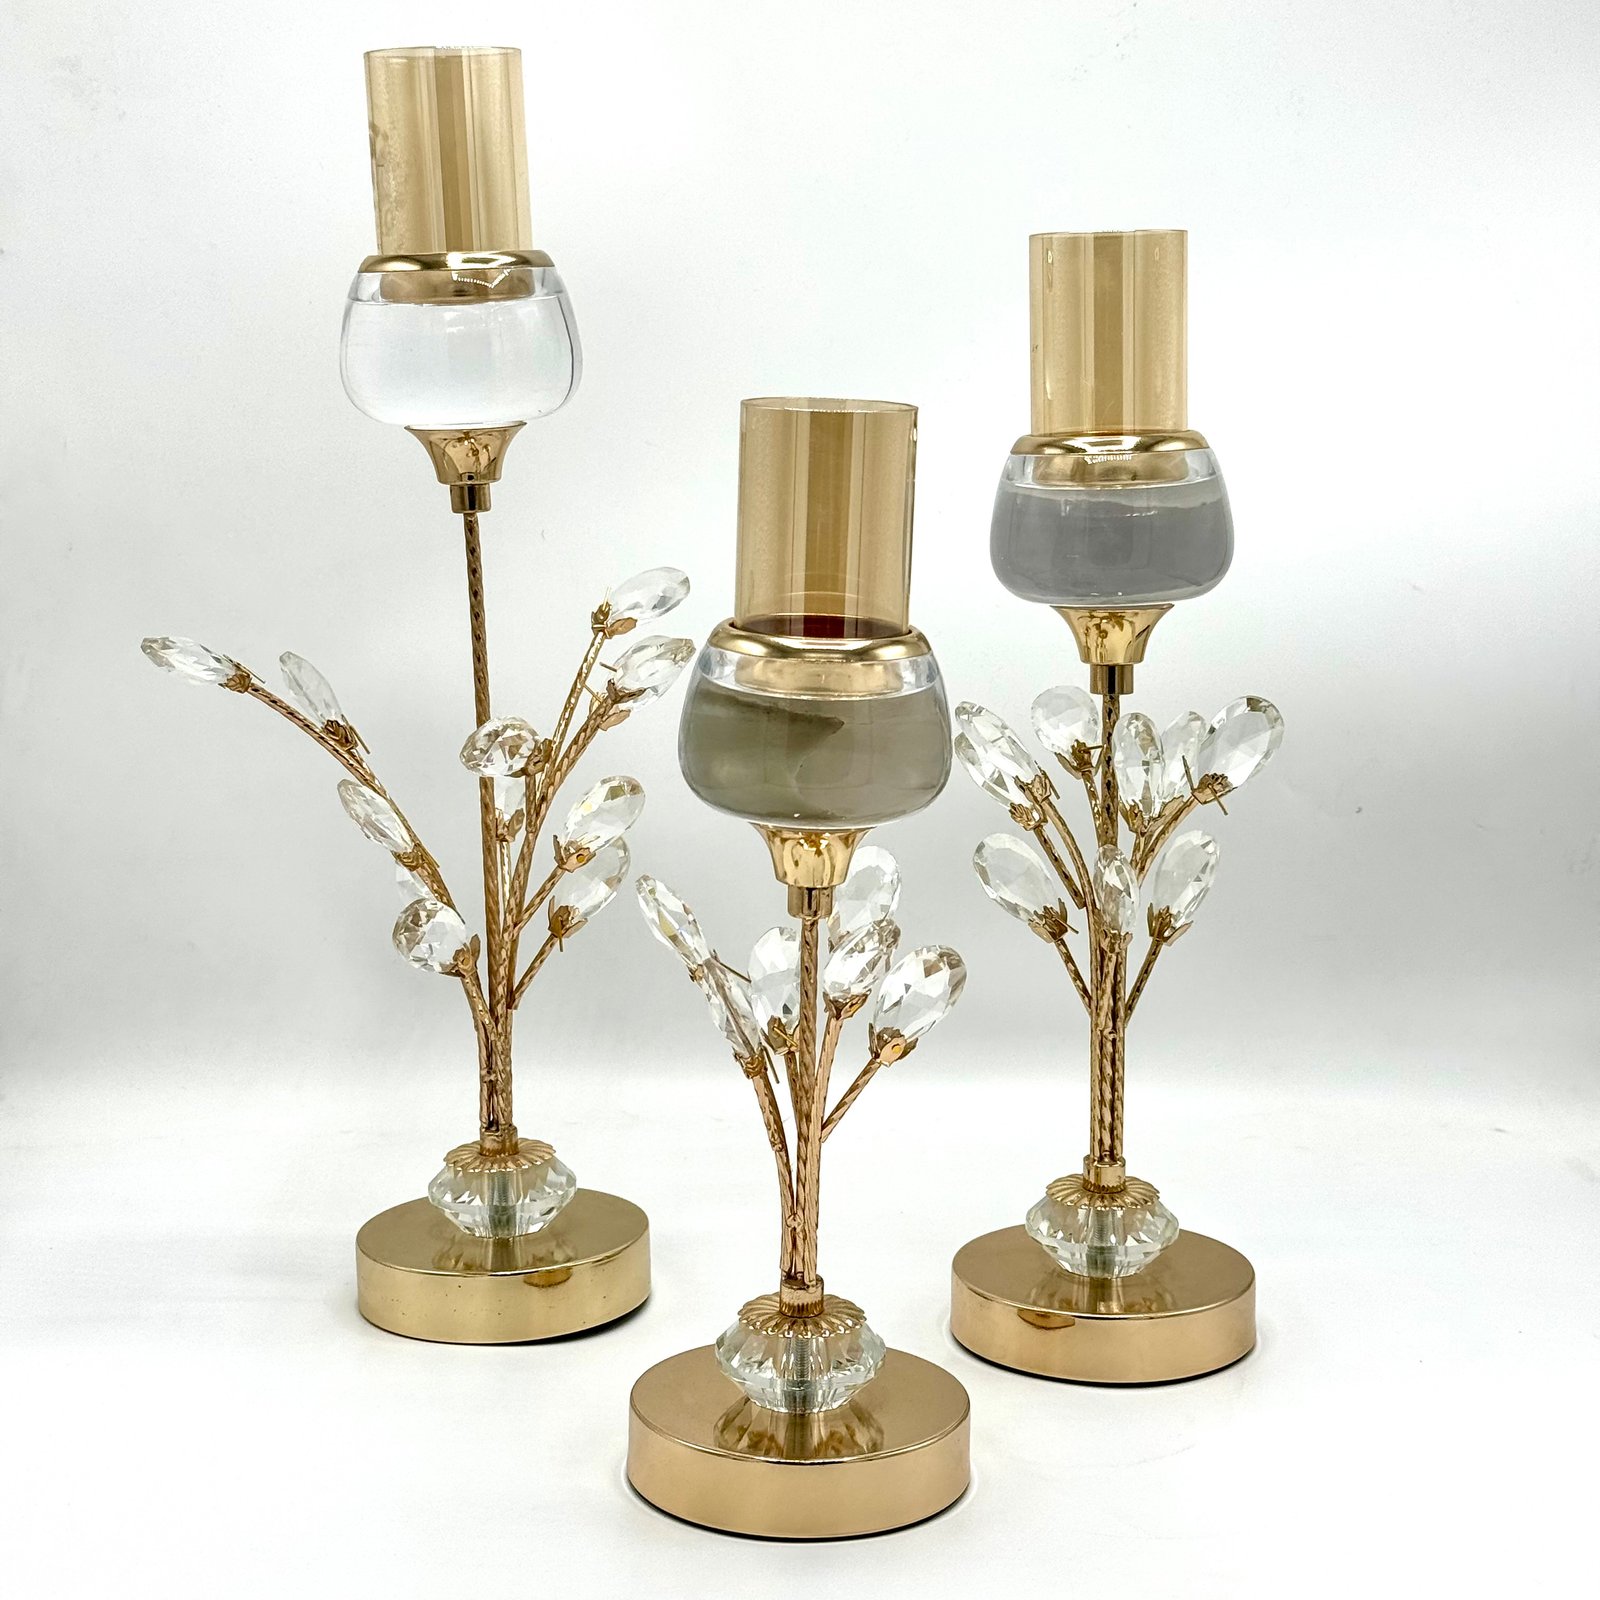 Decor Cystal Body Luxurious Candle Stand 3PCS ART-N-2494